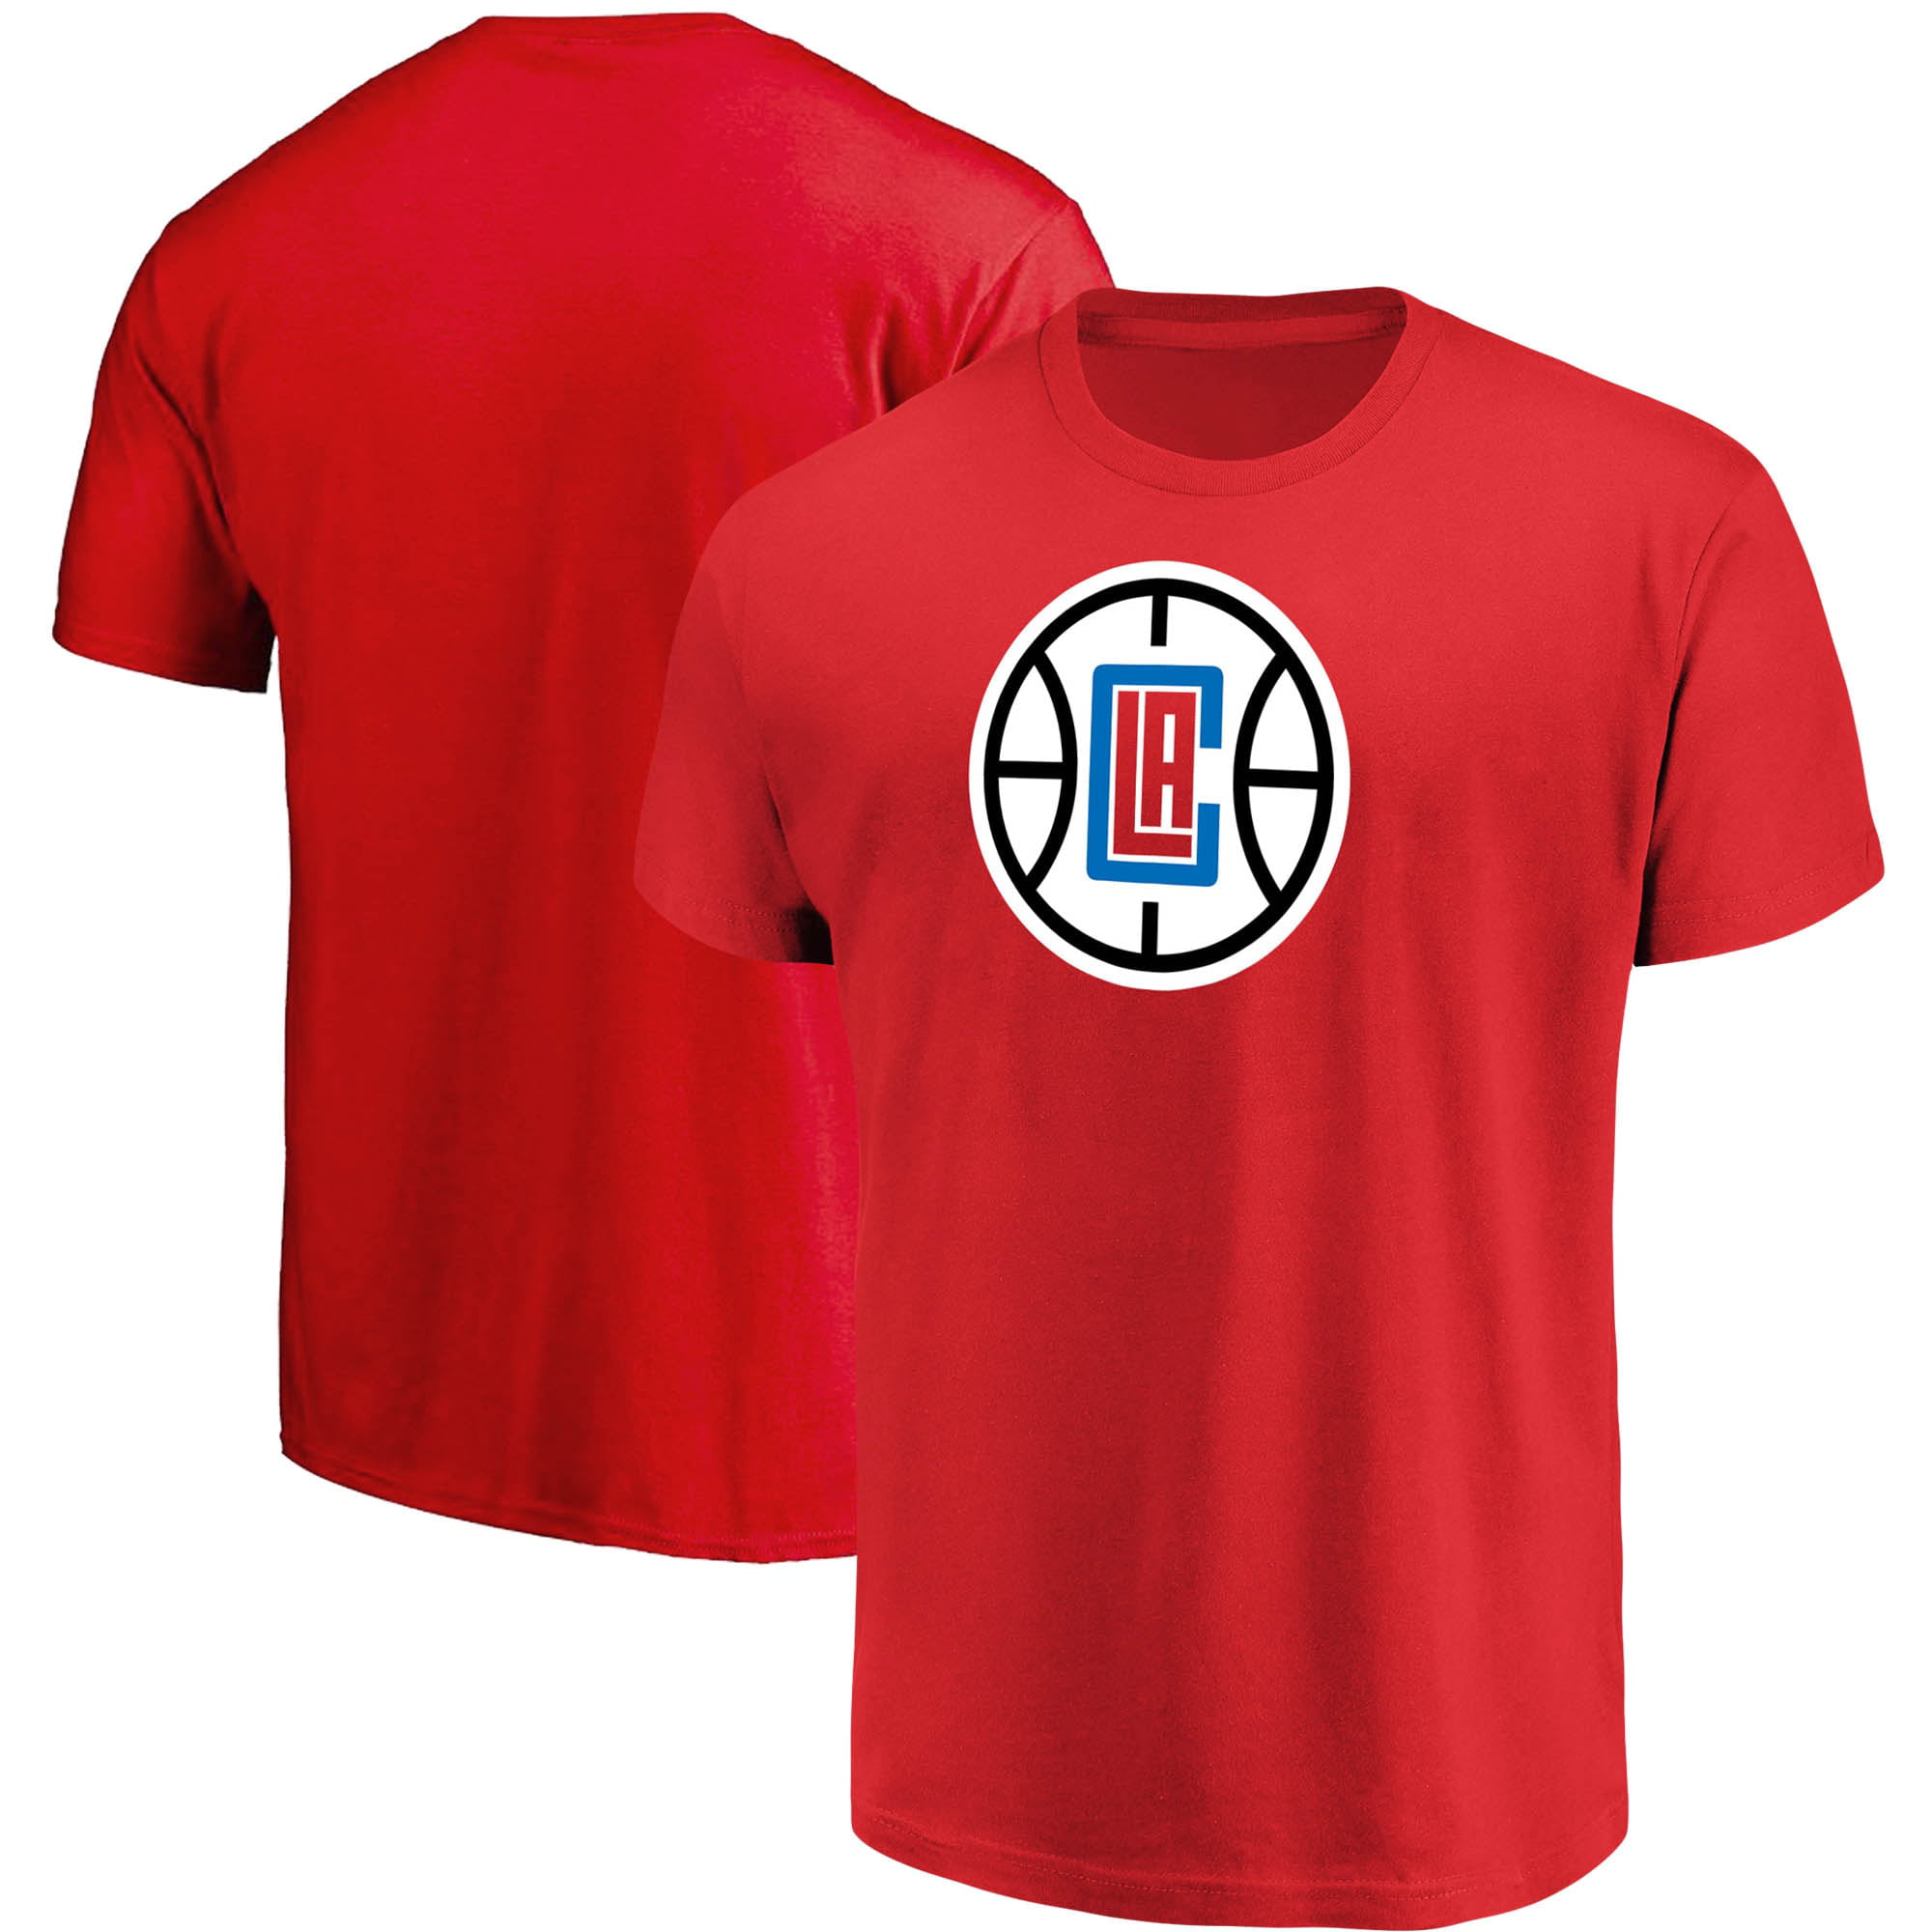 Men's Majestic Red LA Clippers Victory Century T-Shirt 